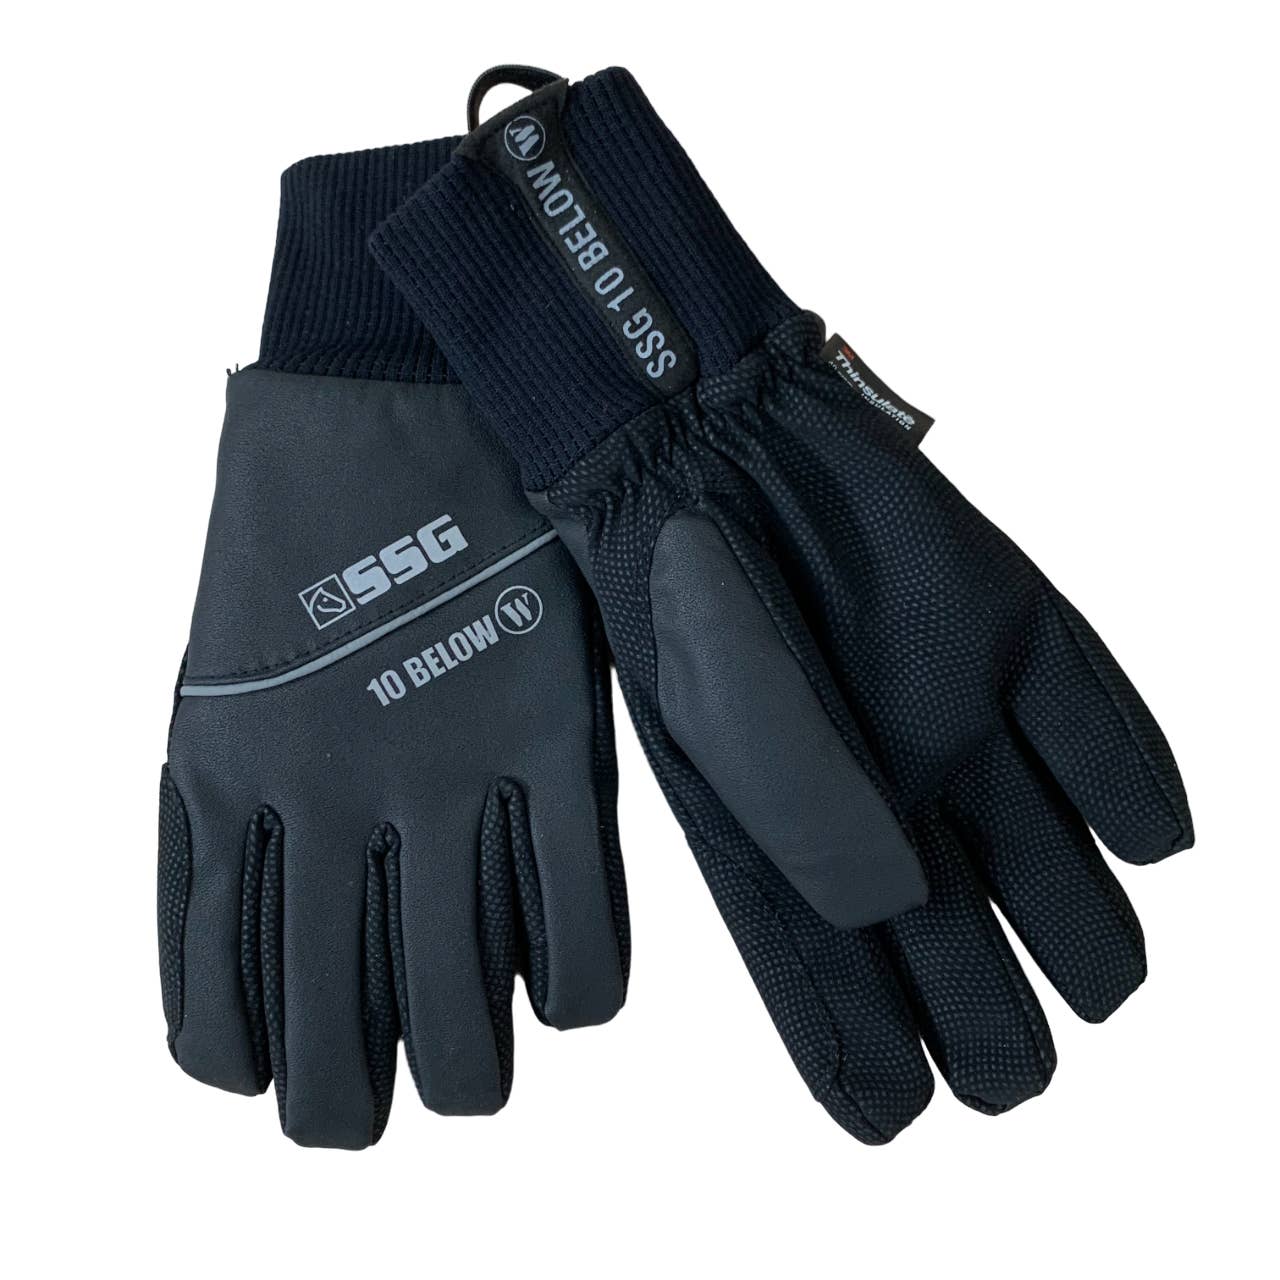 SSG 6400 10 Below Thinsulate Riding Gloves in Black - Woman's 8